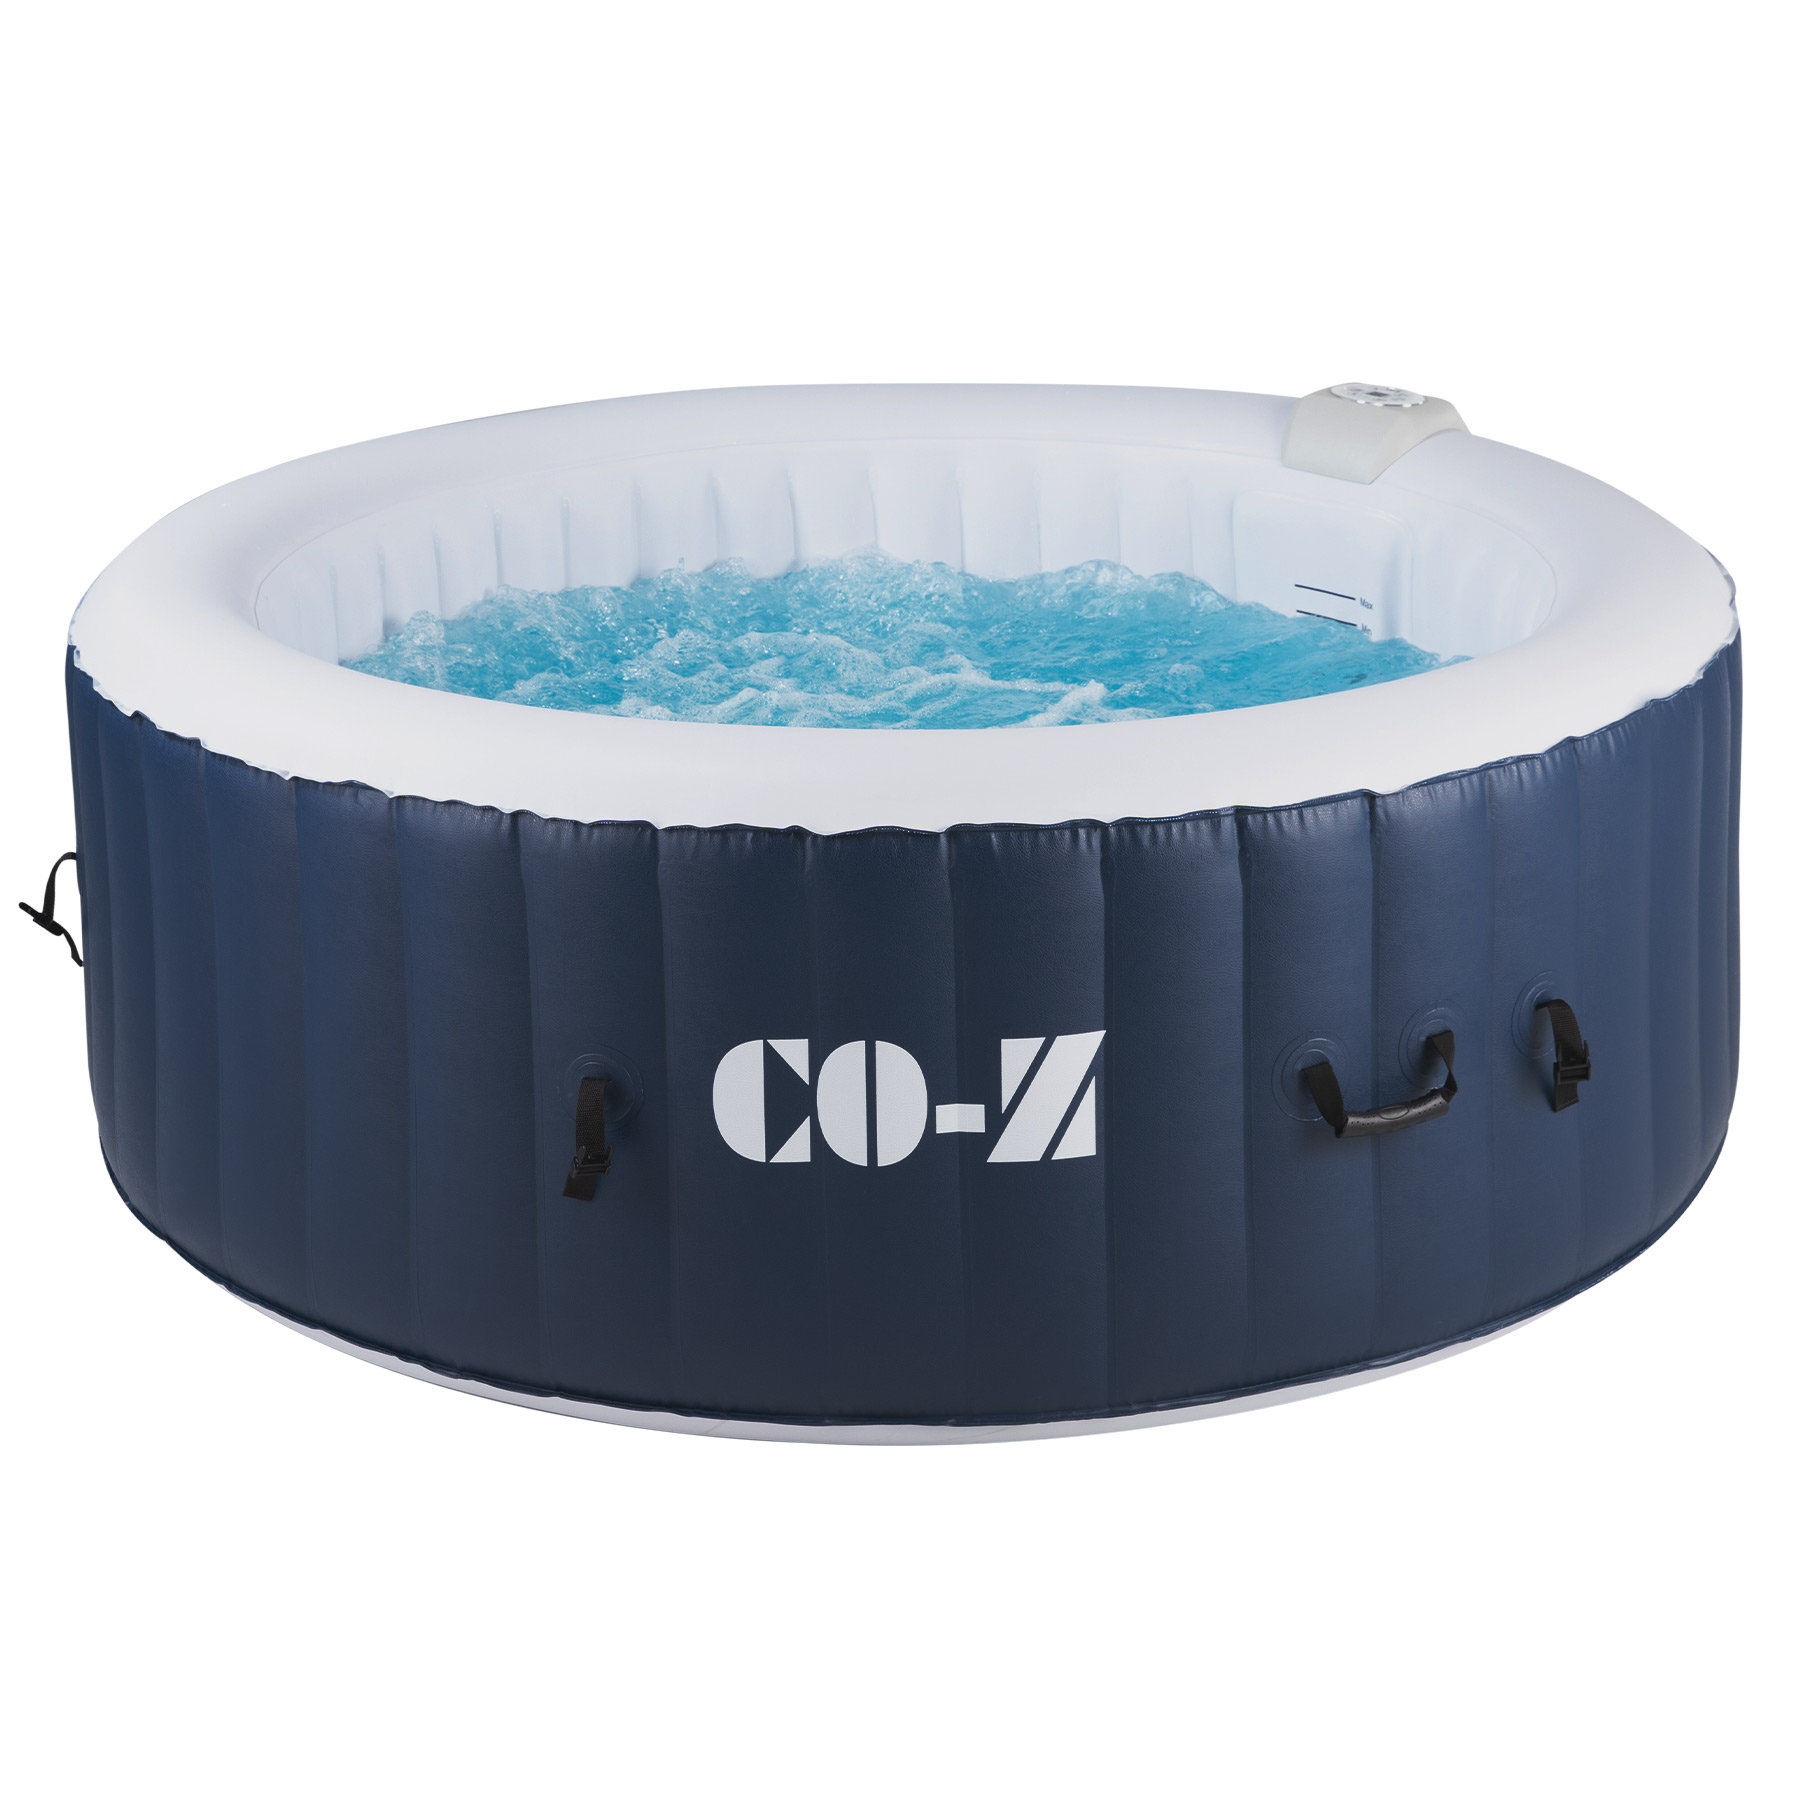 Komfott Hot Tub, 71” x 27” 4 Person Inflatable Hot Tub with 108 Bubble